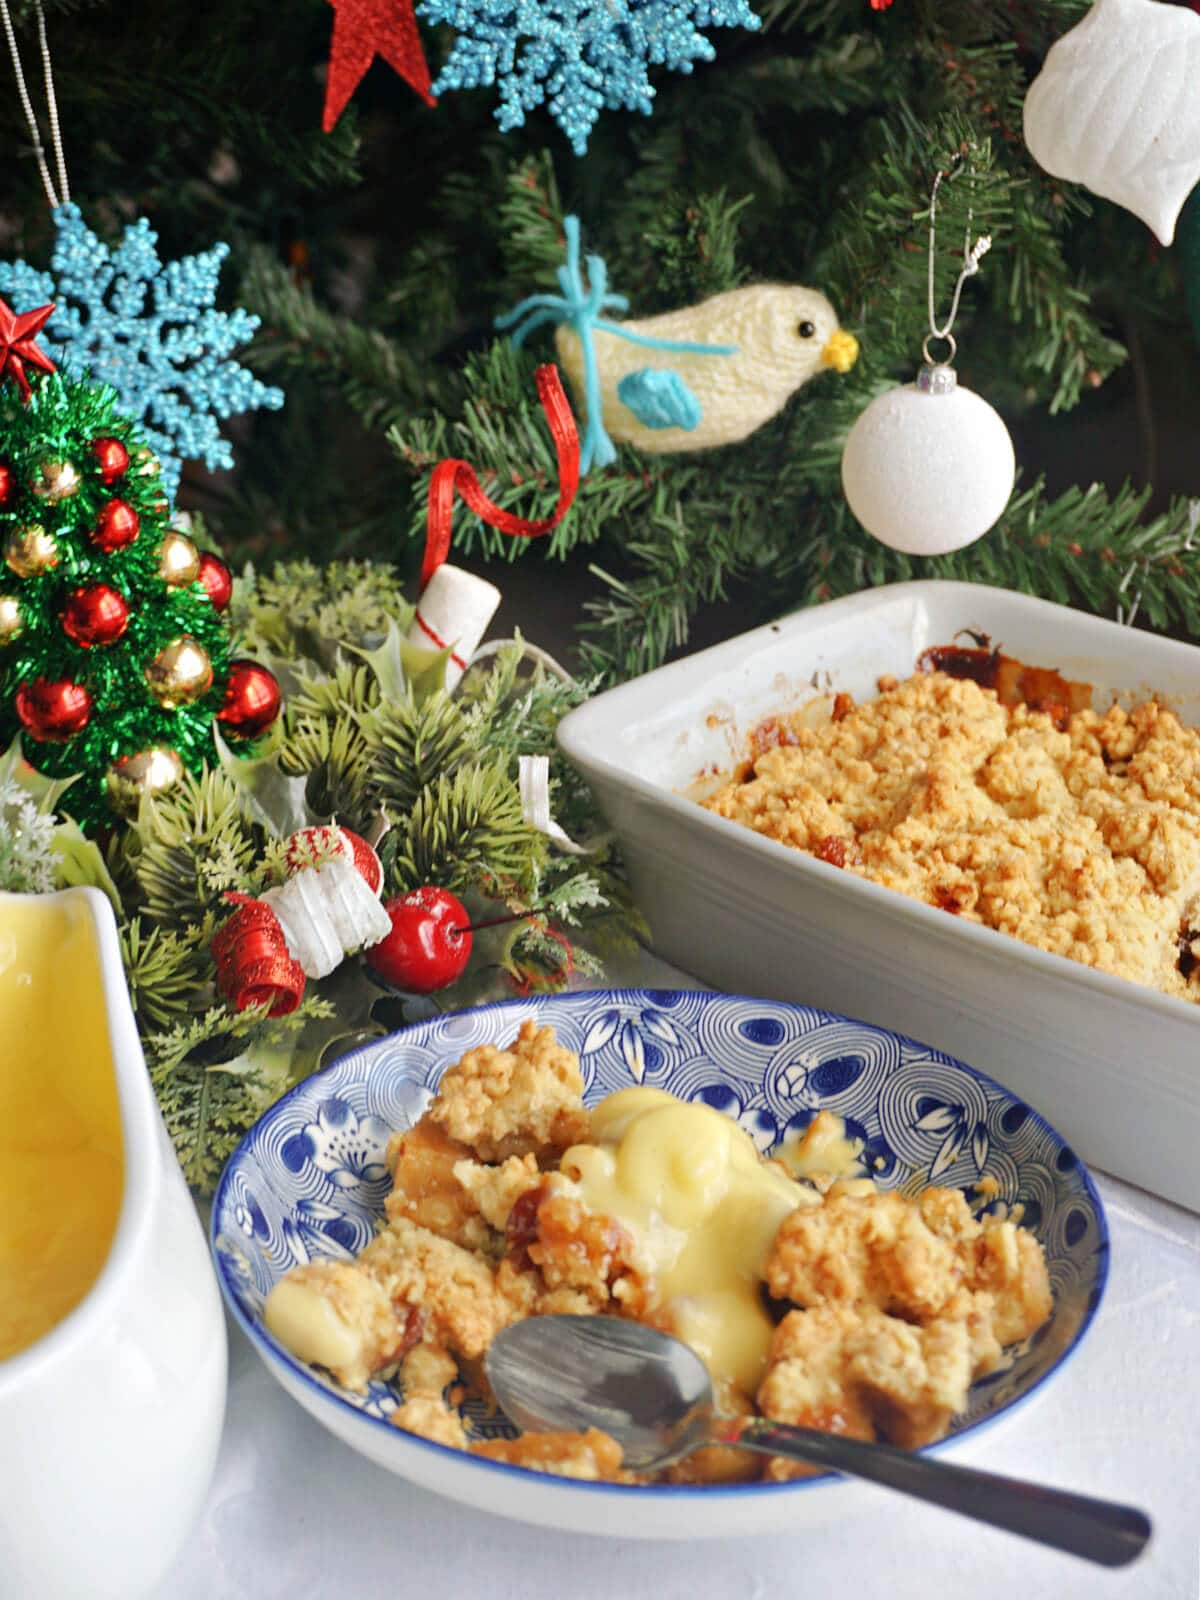 A blue plate with crumble, an oven dish with more crumble and a Christmas tree in the background.